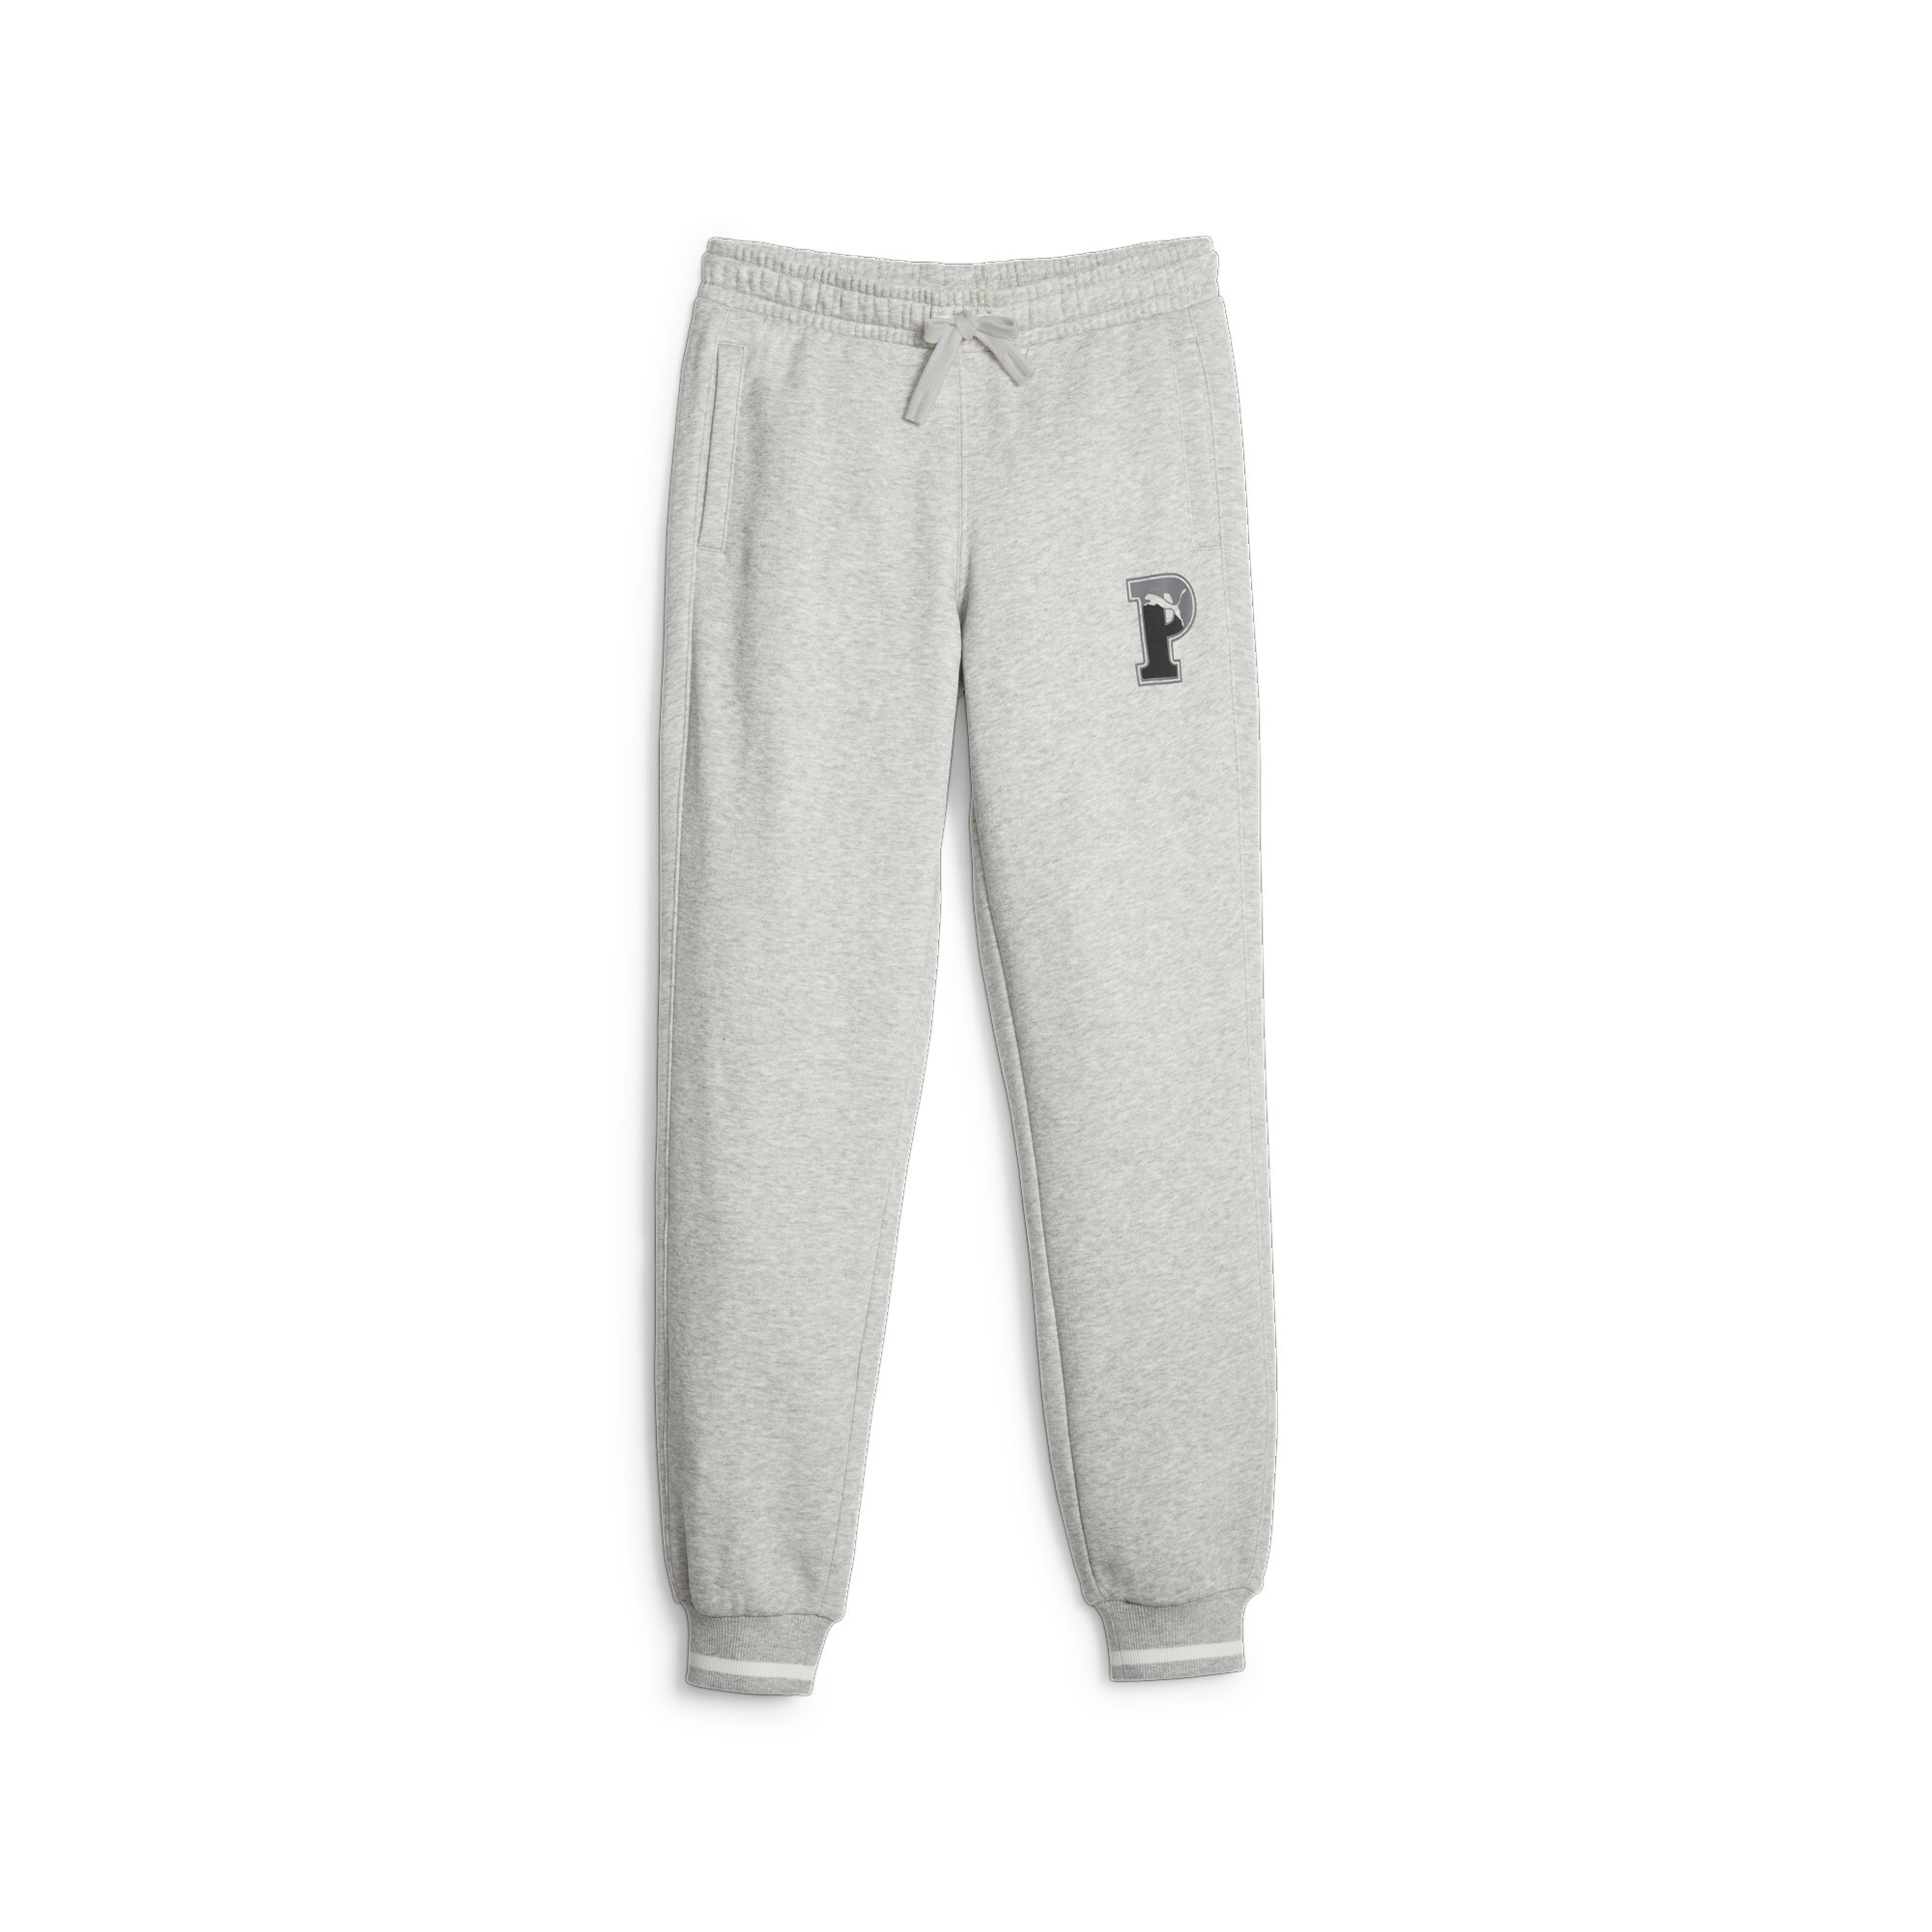 PUMA SQUAD Sweatpants In Heather, Size 11-12 Youth